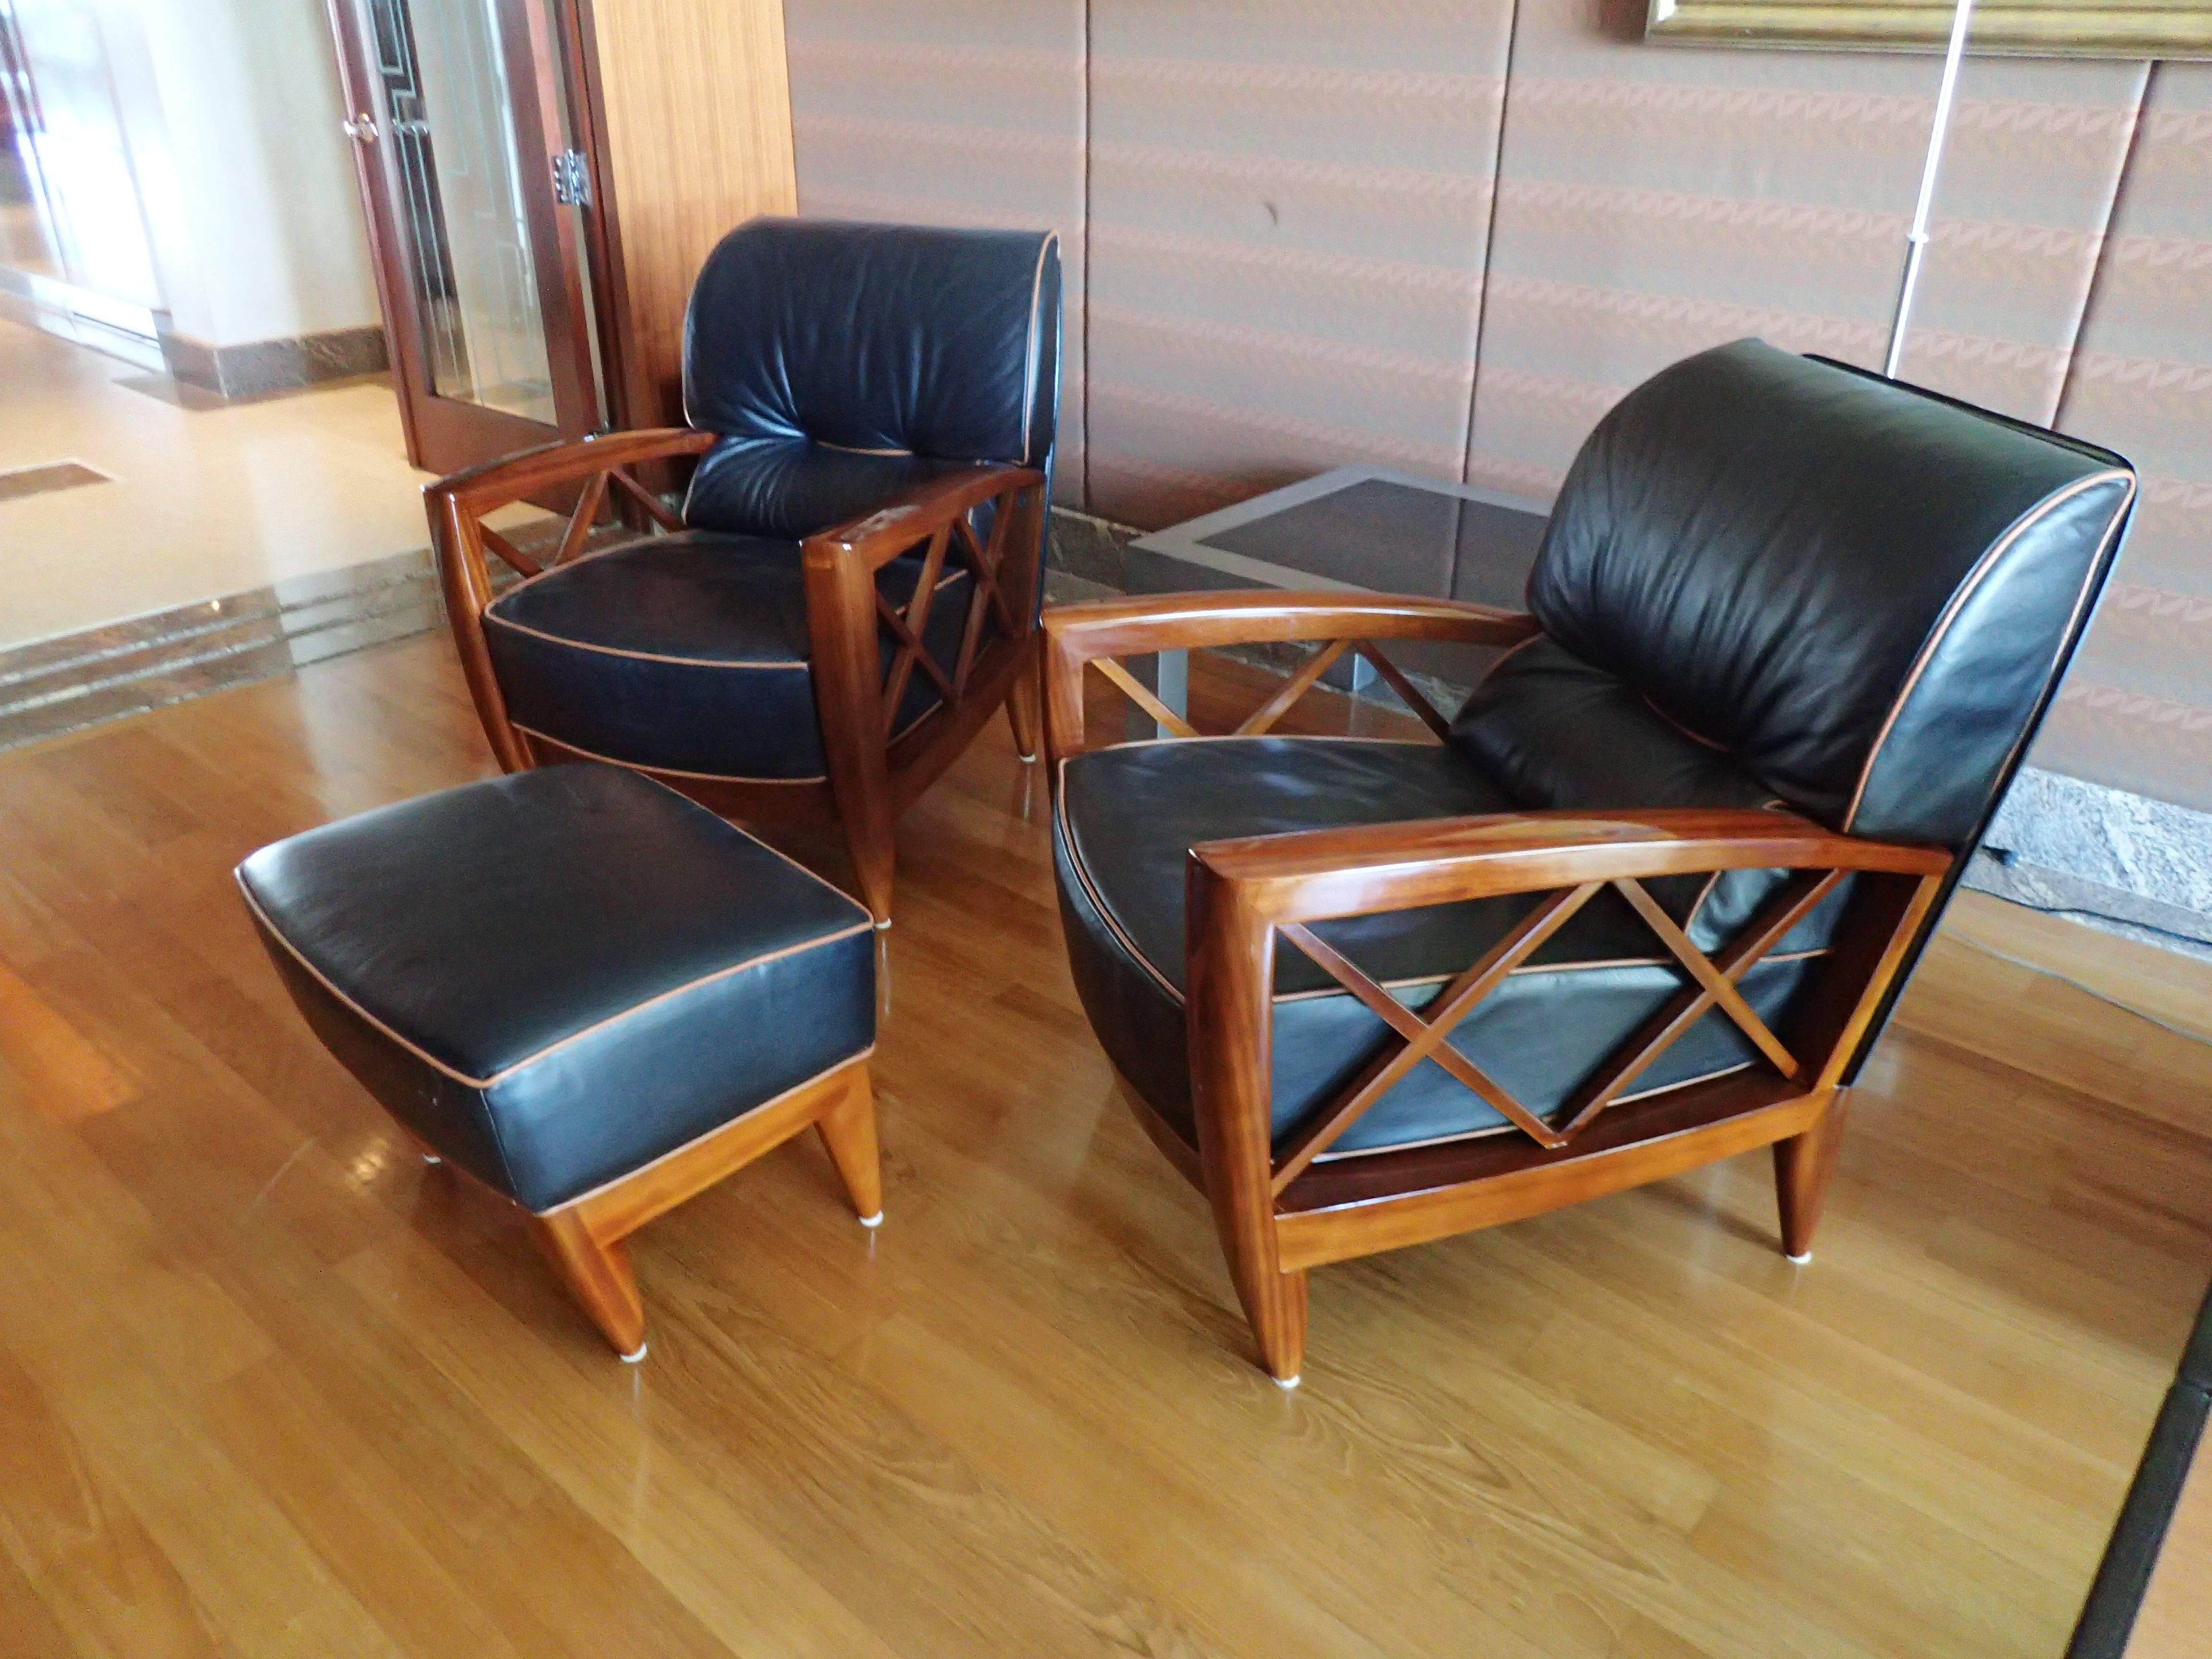 This beautiful pair of pace chairs have the original leather and wood finish. They are in excellent condition. The leather is black with tan piping.